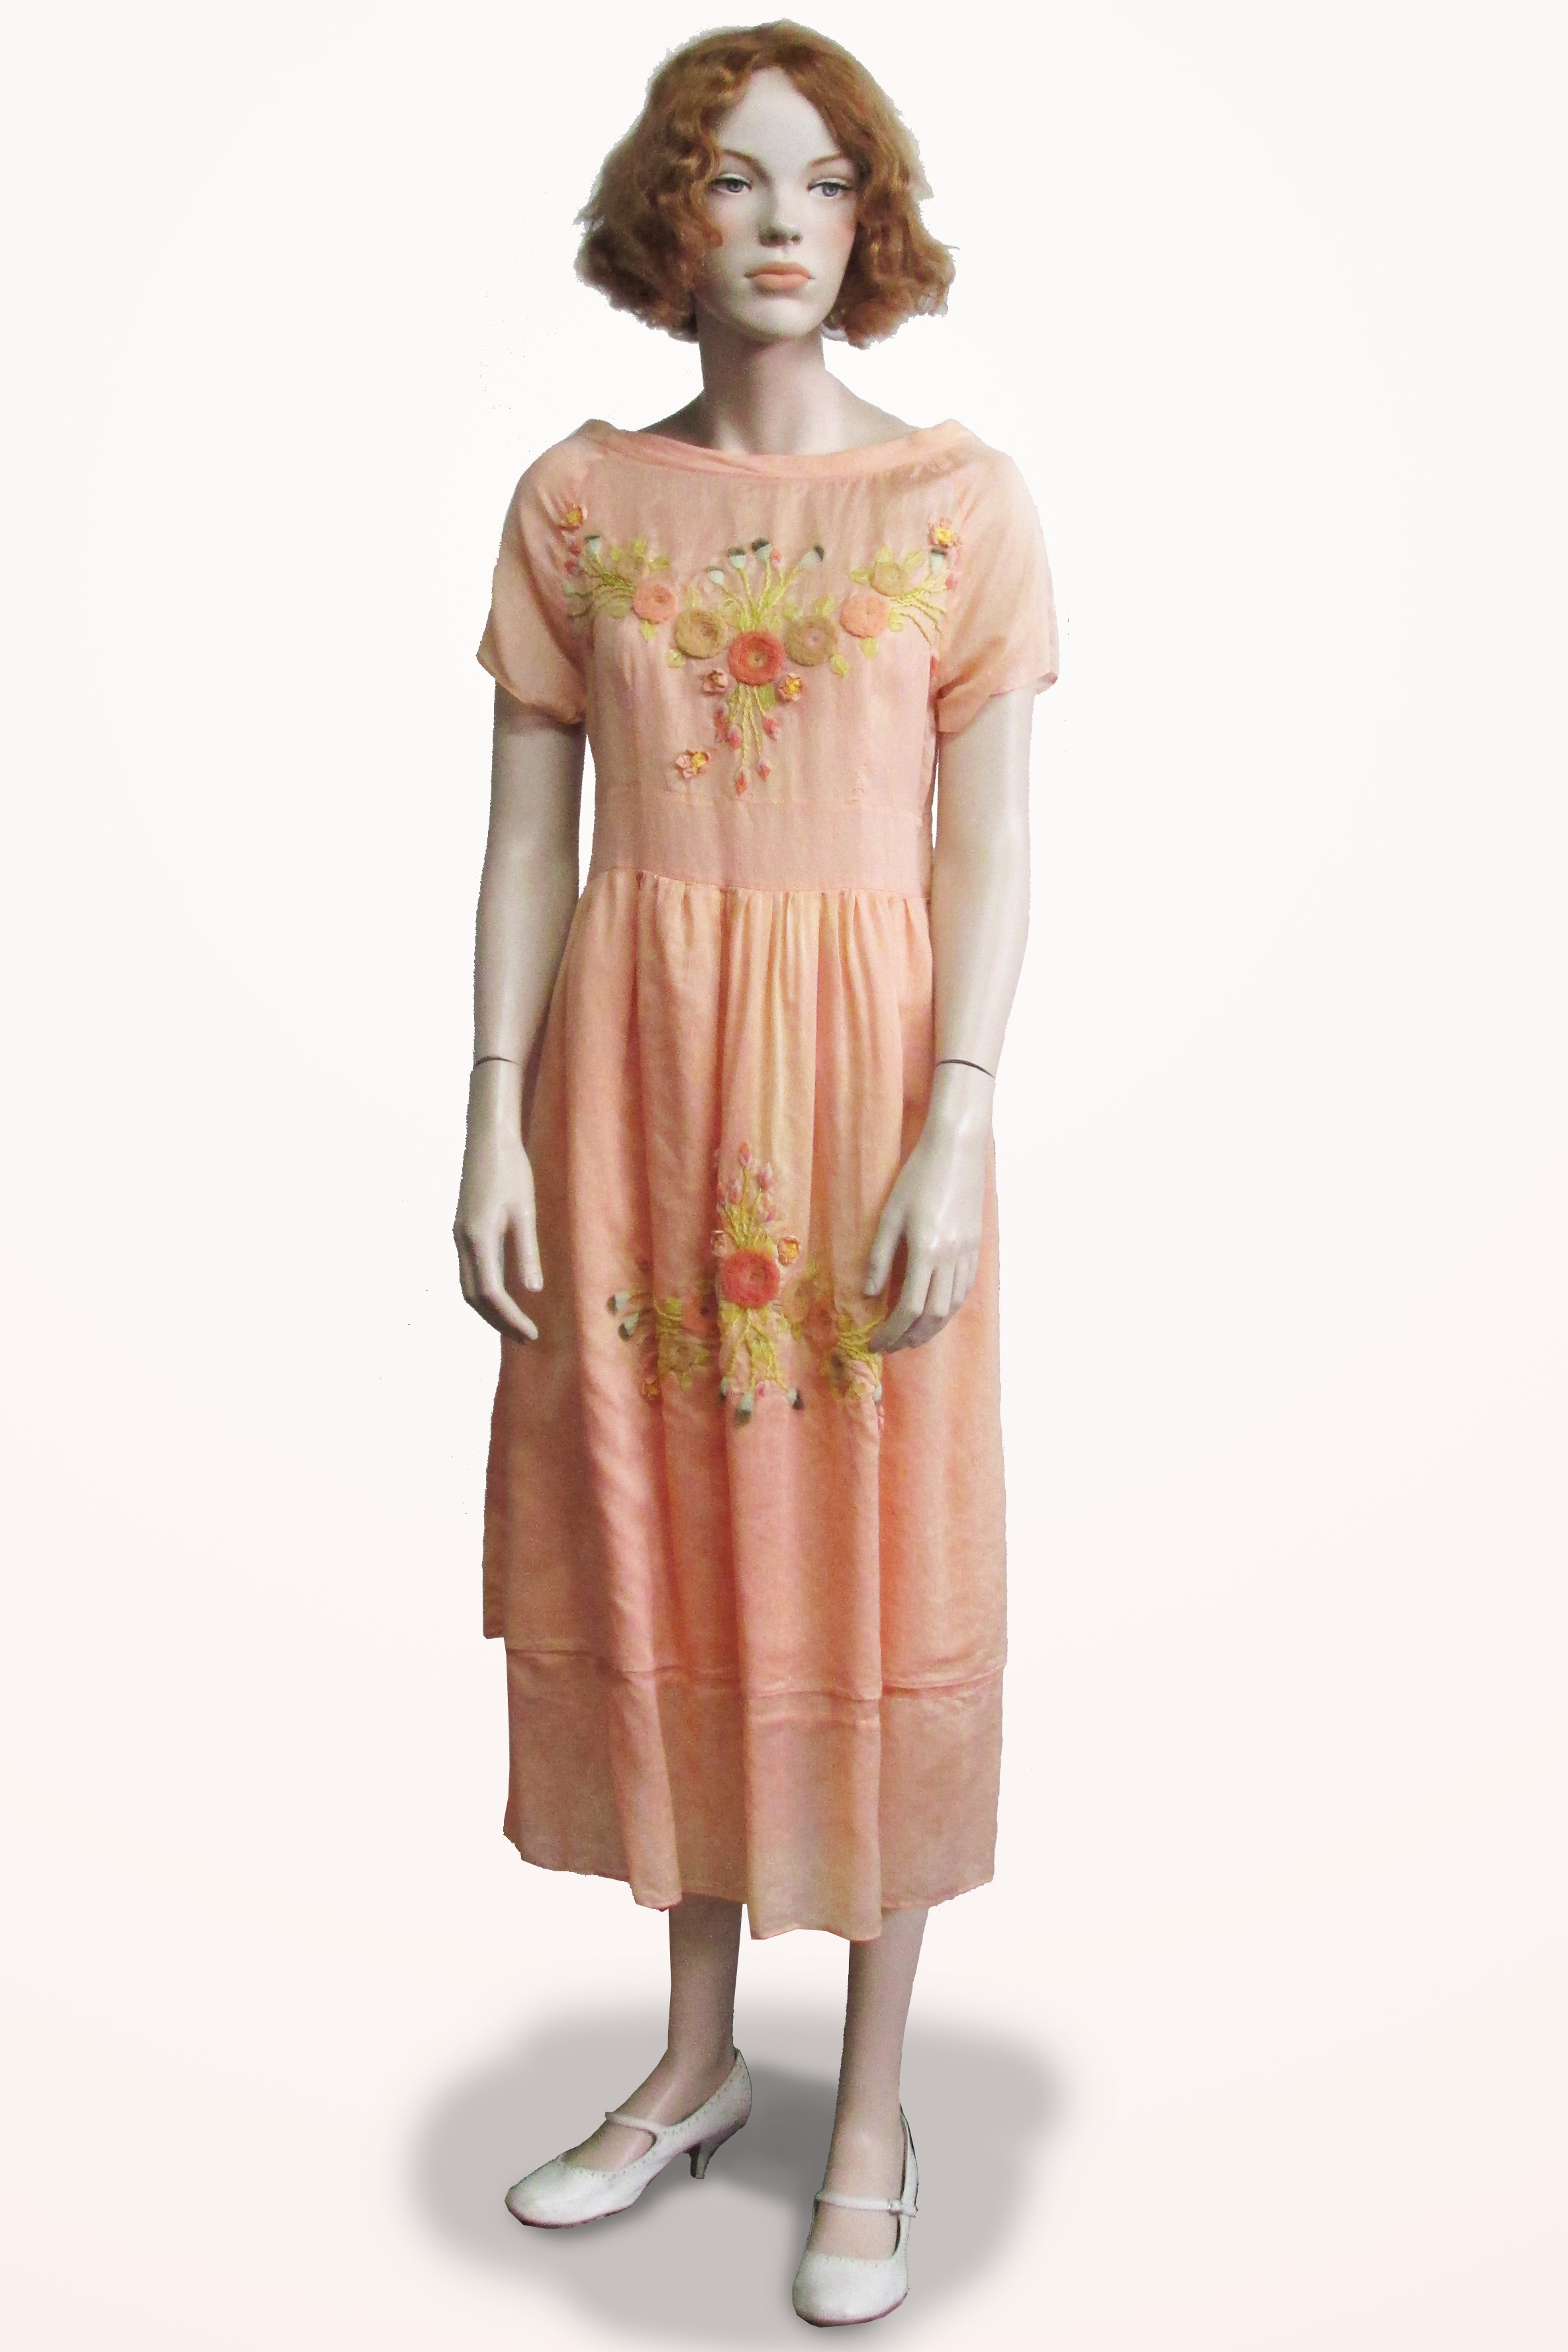 Dress Peach Organza with Embroidery Flowers